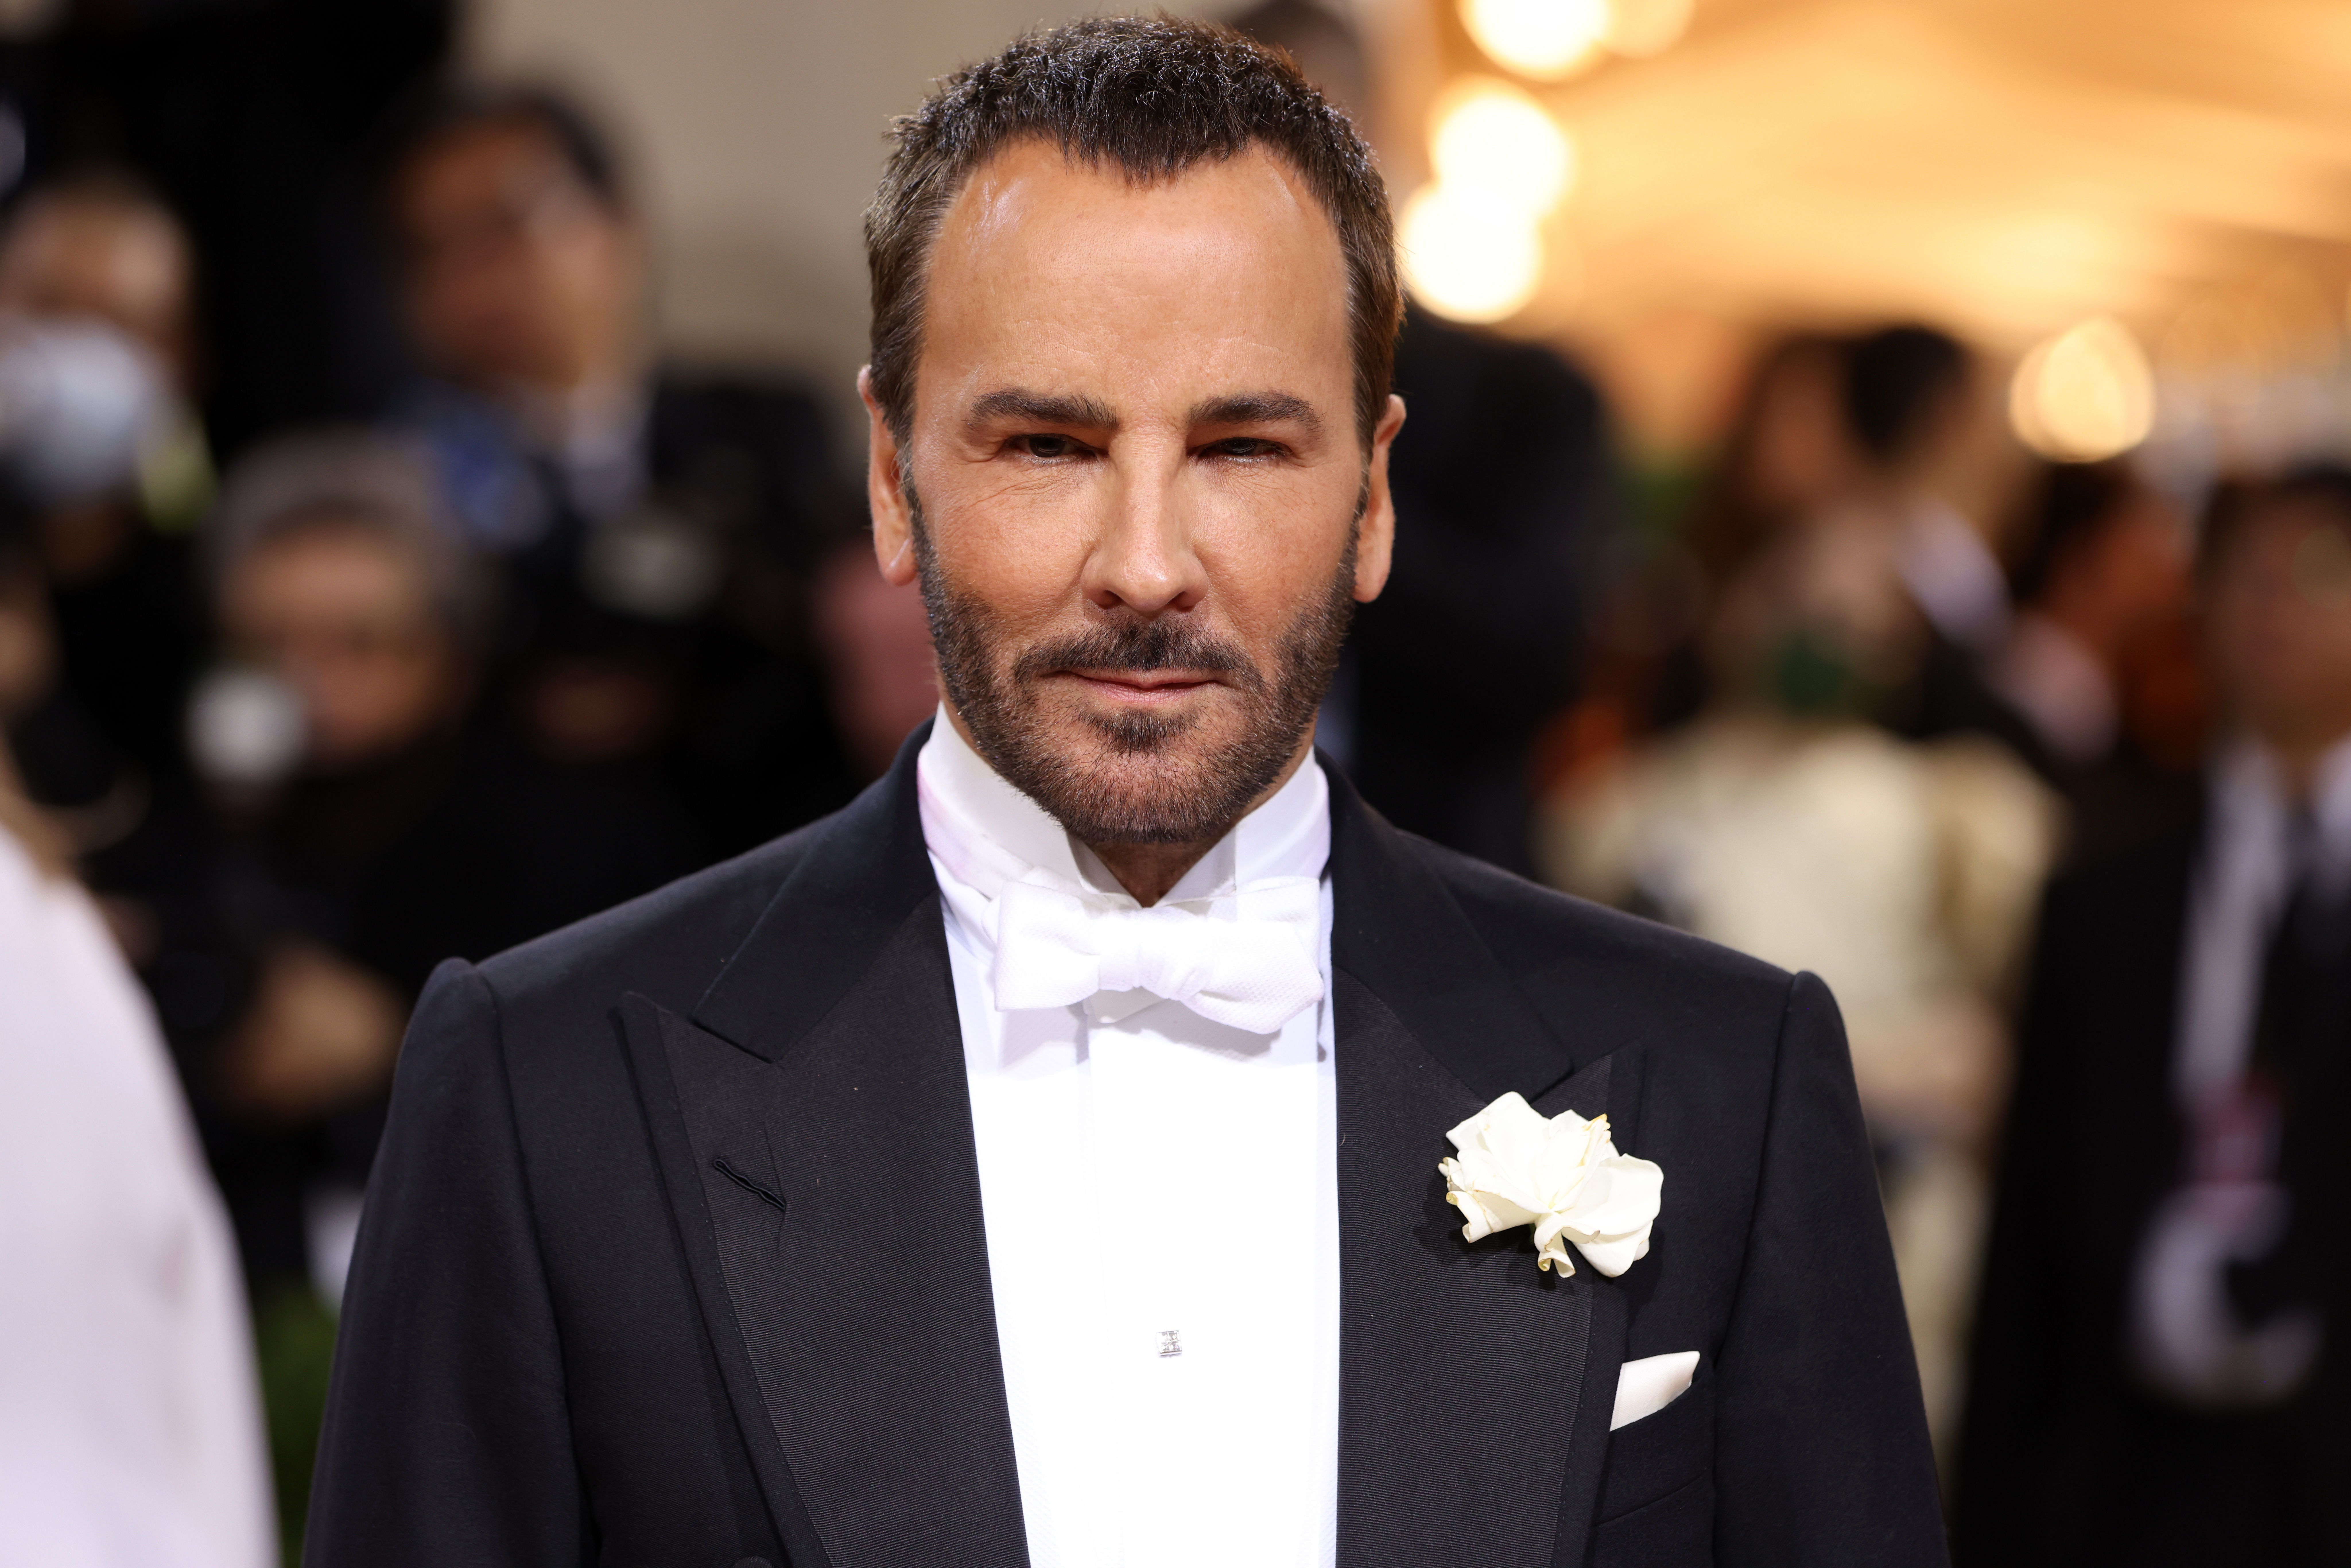 Estee Lauder in talks to acquire Tom Ford brand - WSJ | Reuters